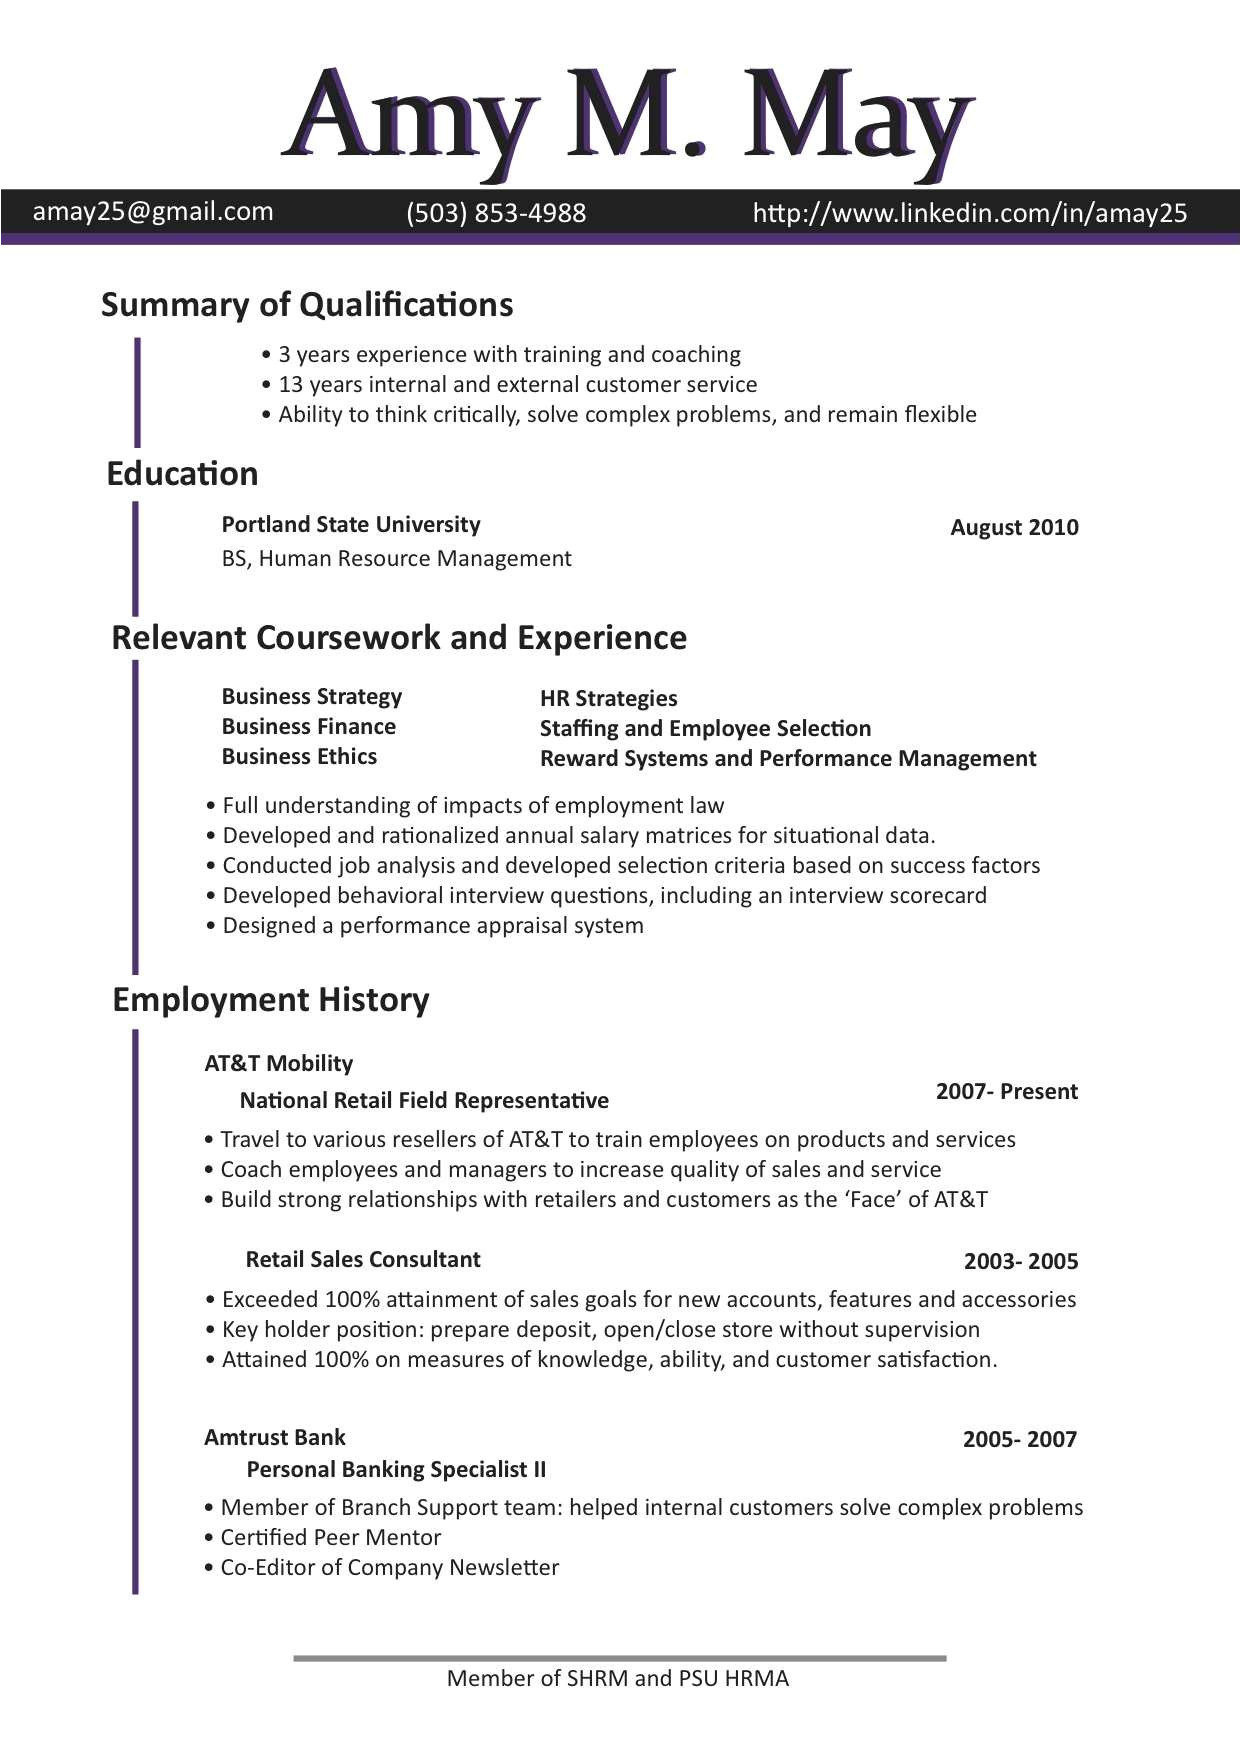 resume template training manual word 2010 how to make a create a resume in word